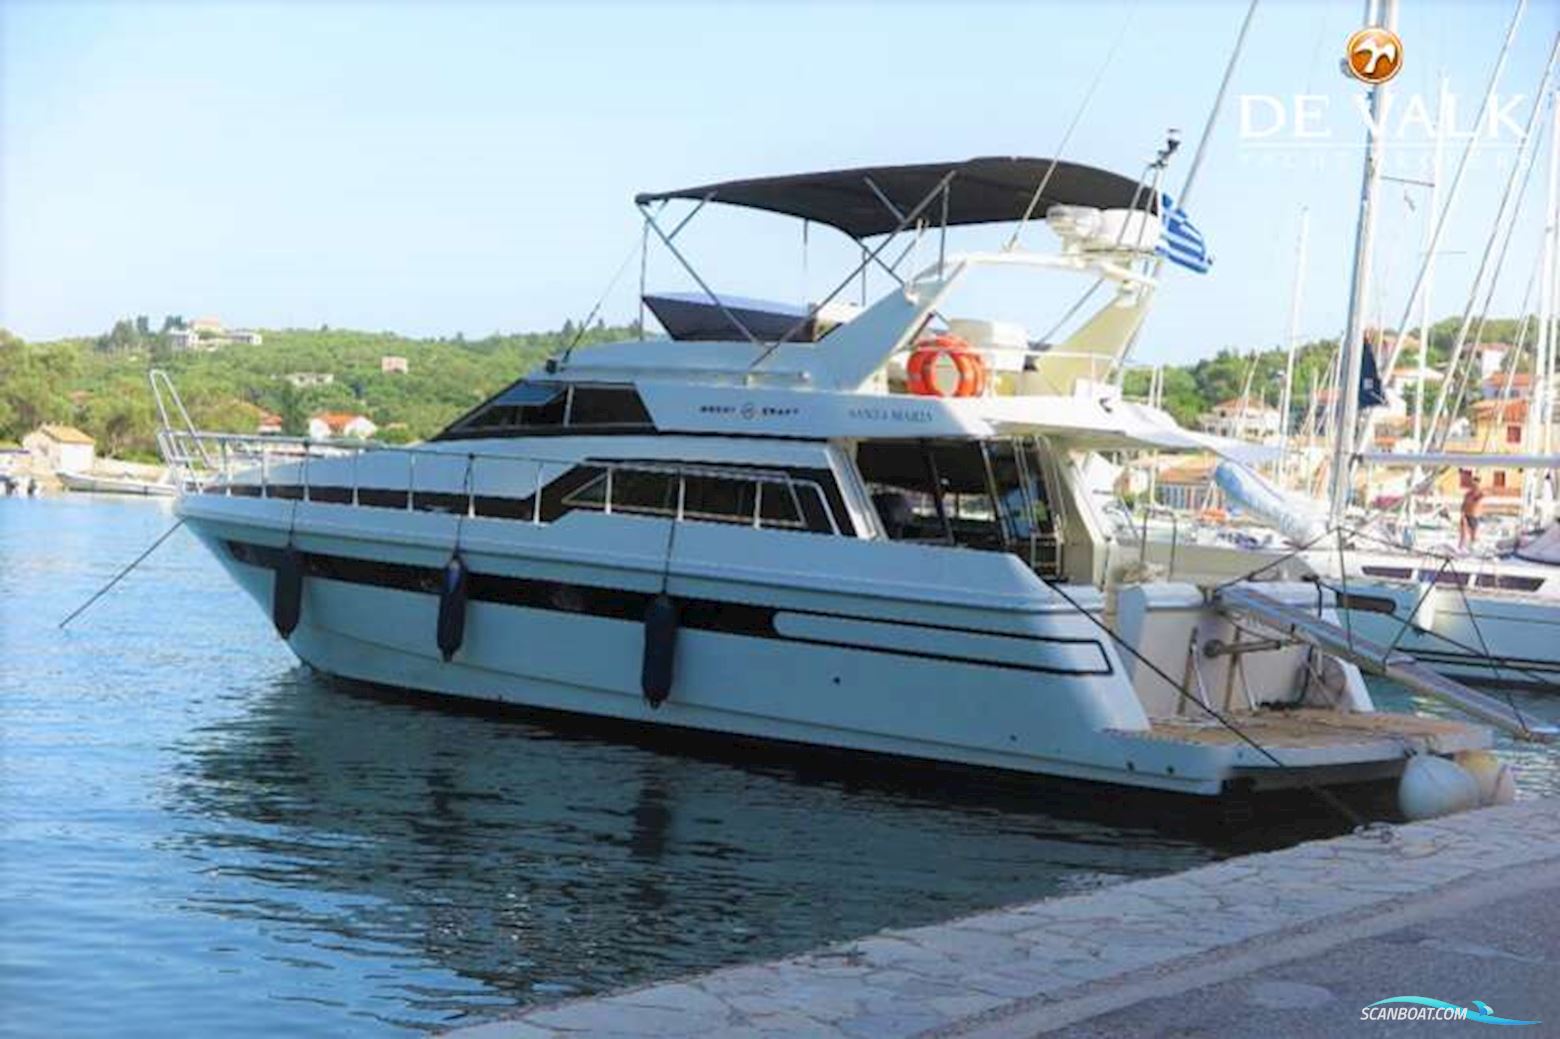 Mochi Craft 44 Dolphin Motor boat 1987, with General Motors engine, Greece